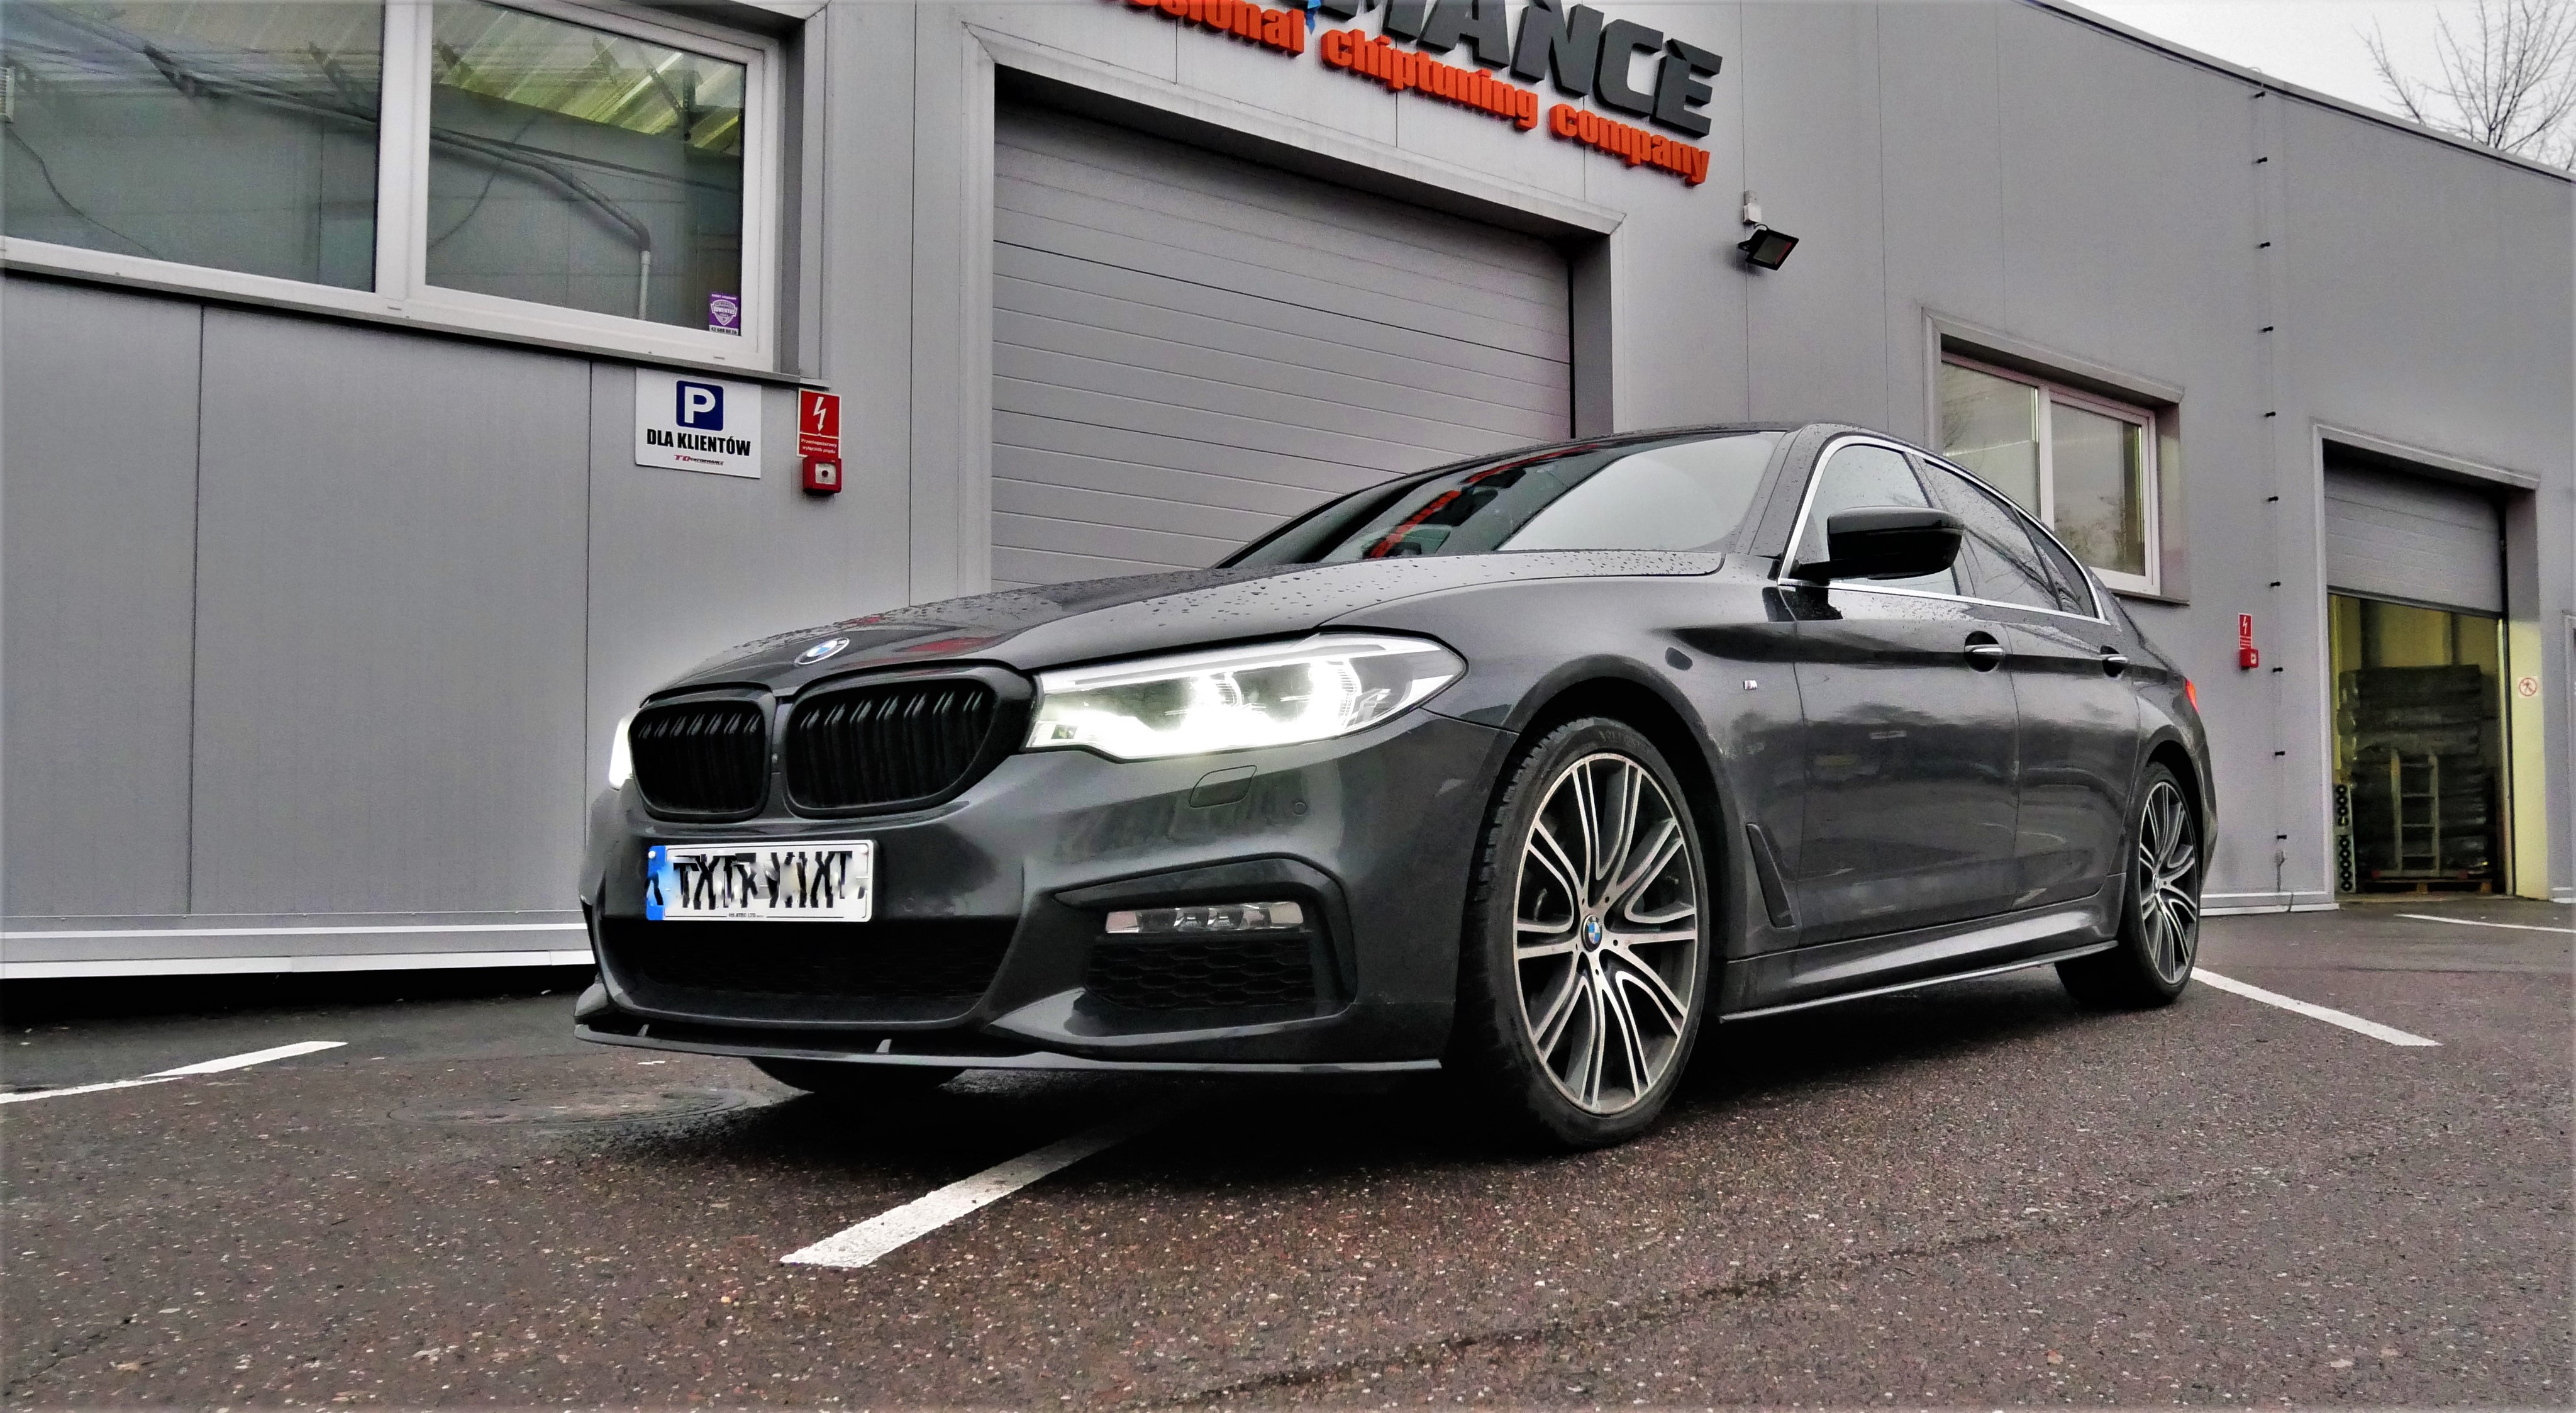 CHIPTUNING BMW G30 540i 340KM STAGE 1+ TCPERFORMANCE